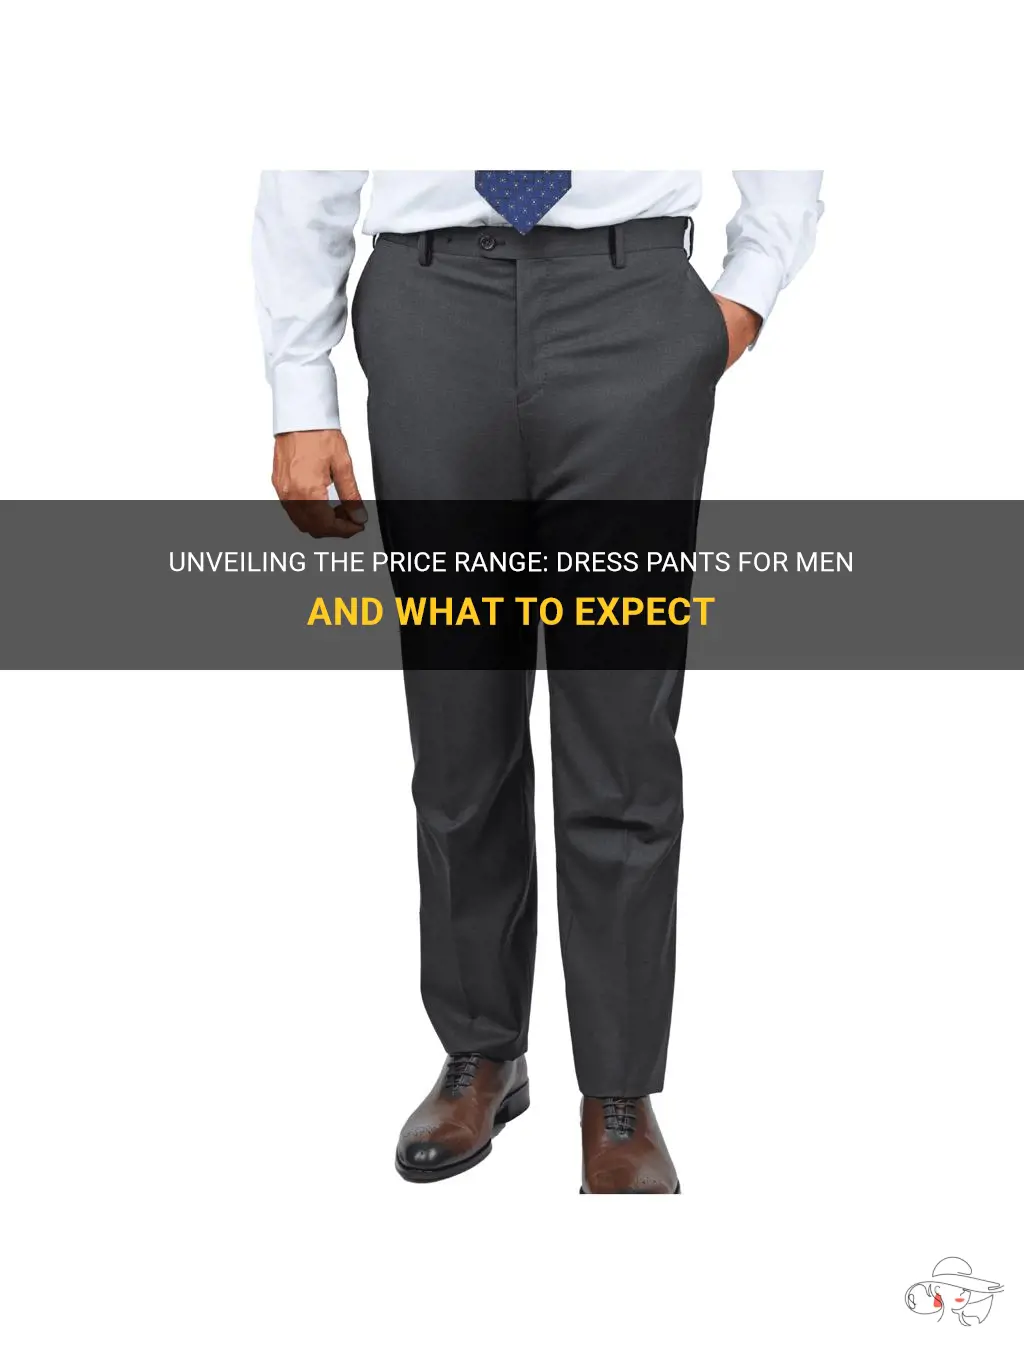 how much is a dress pant for men